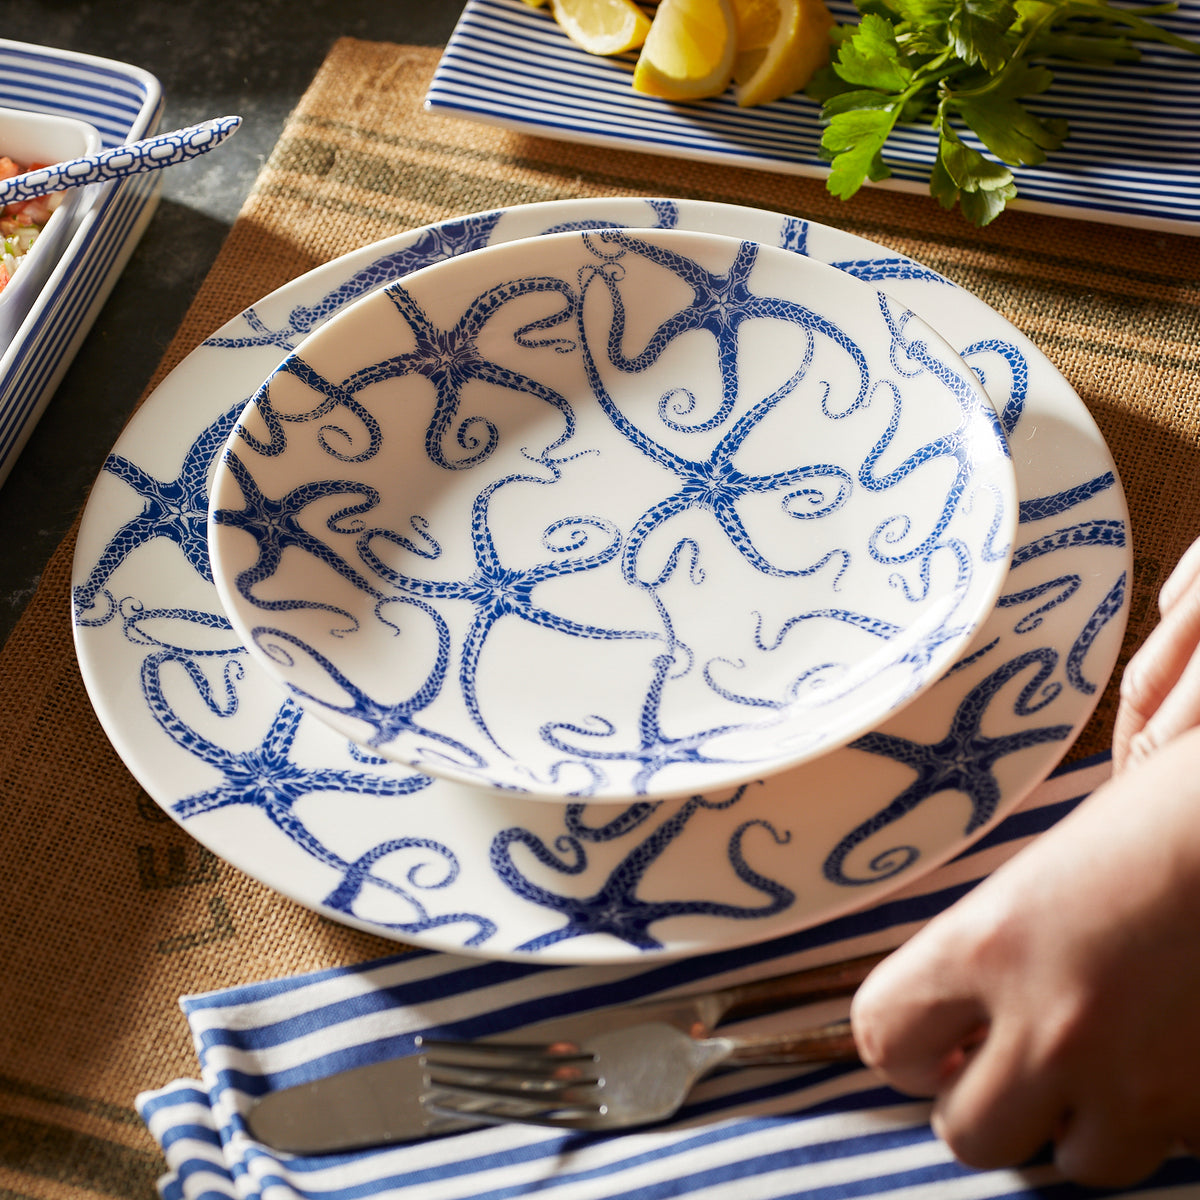 A hand placing a fork and knife onto a striped blue and white napkin next to a Caskata Artisanal Home Starfish Coupe Salad Plate with blue octopus designs on a woven table mat, with herbs and lemon slices in the background.